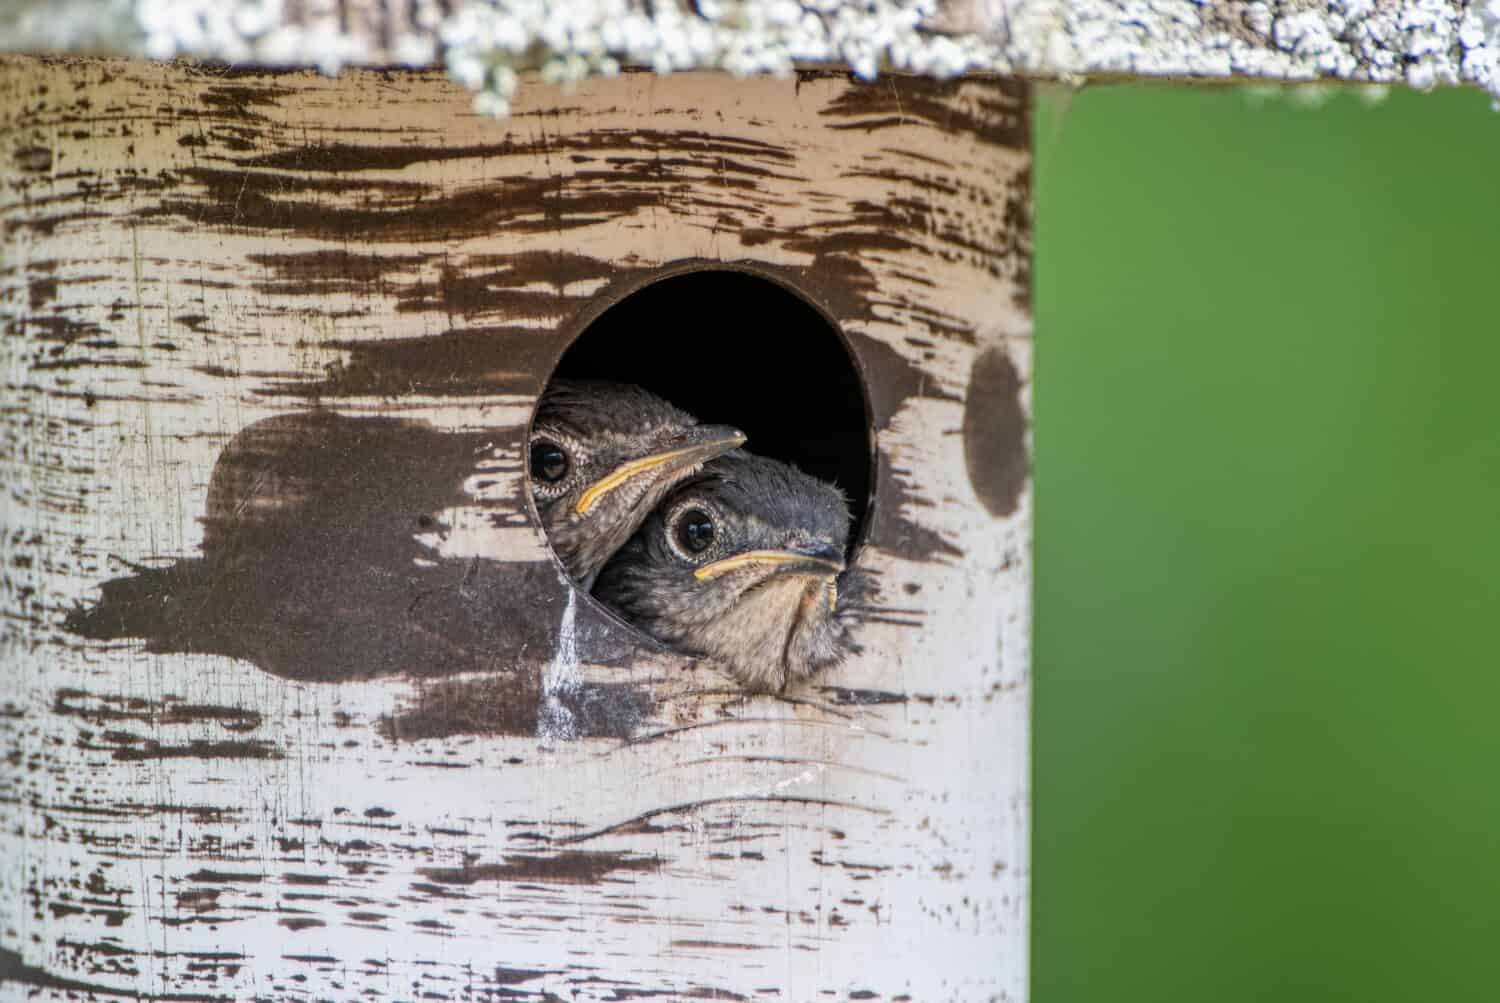 Two Baby Bluebirds Peeking Out the Nesting Box in April in Louisiana